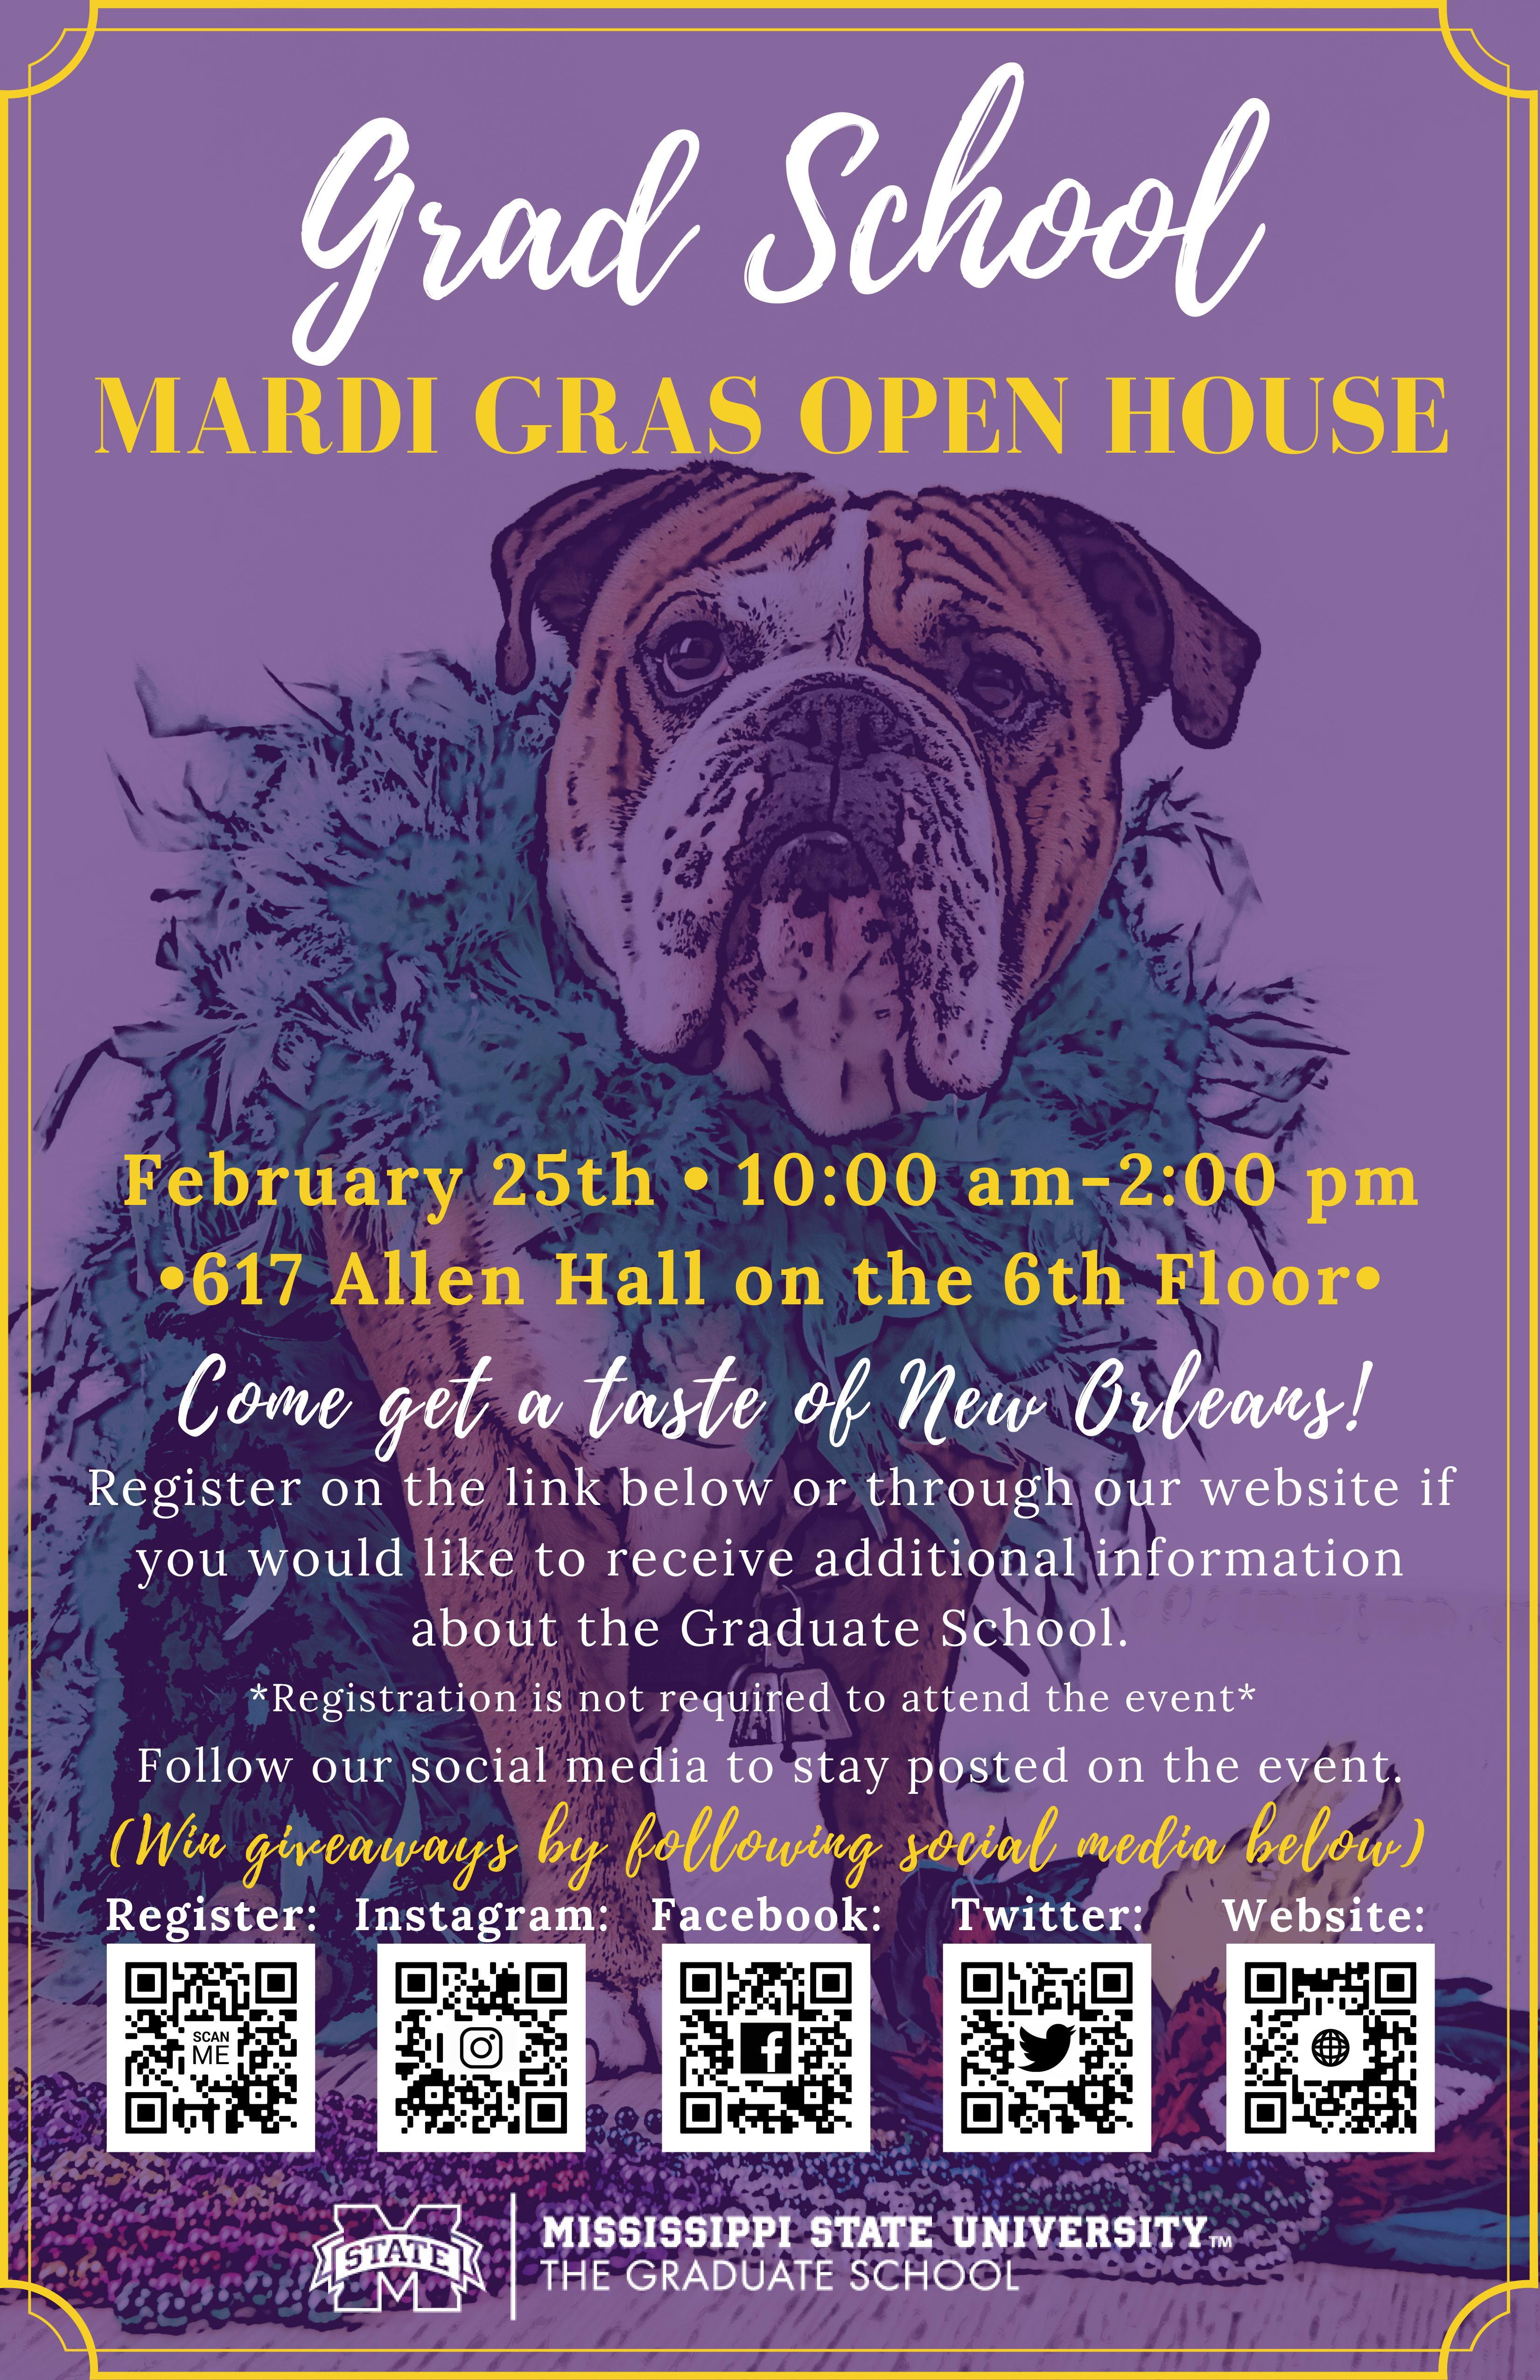 Promotional graphic for the MSU Graduate School's Mardi Gras Open House